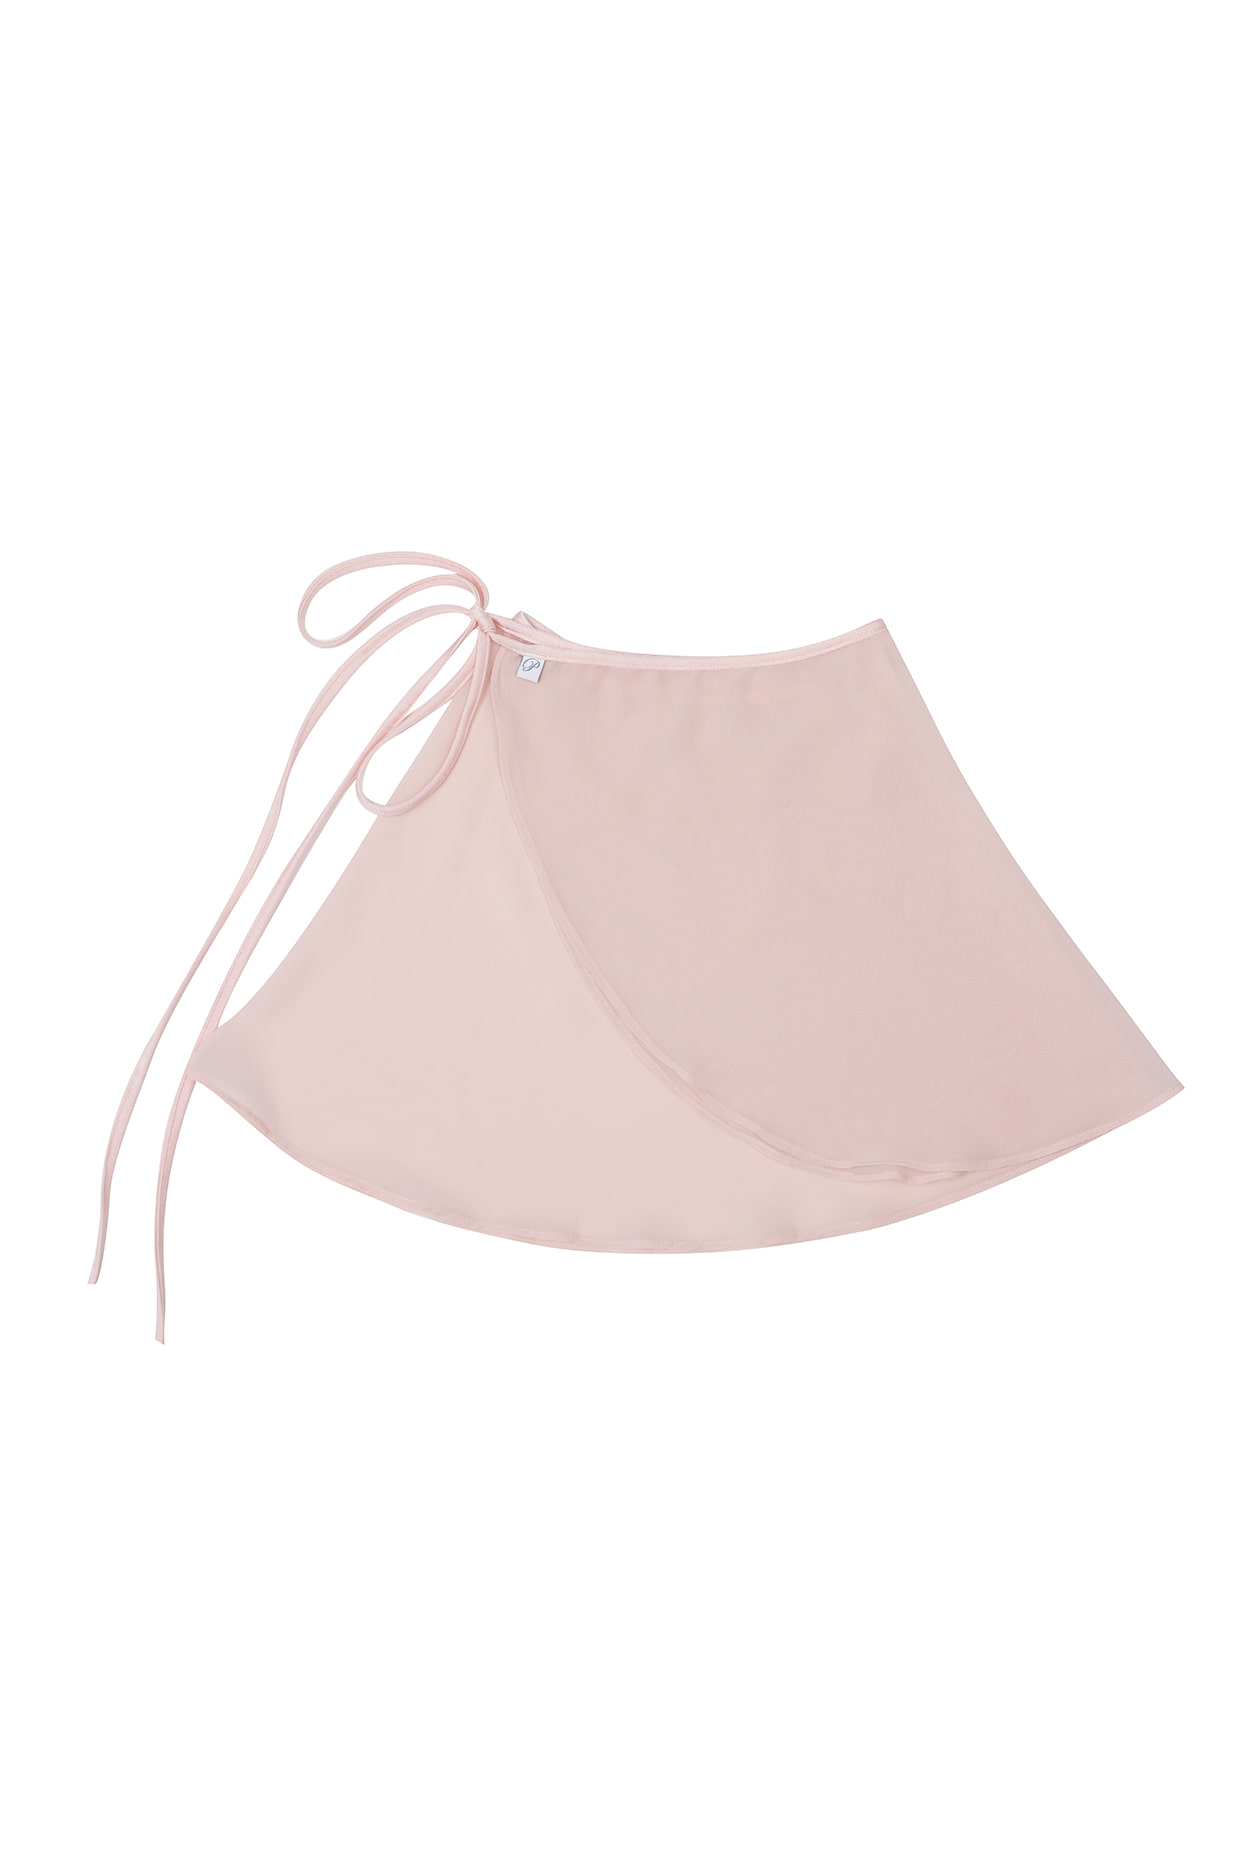 WRAP COVER-UP SKIRT pink